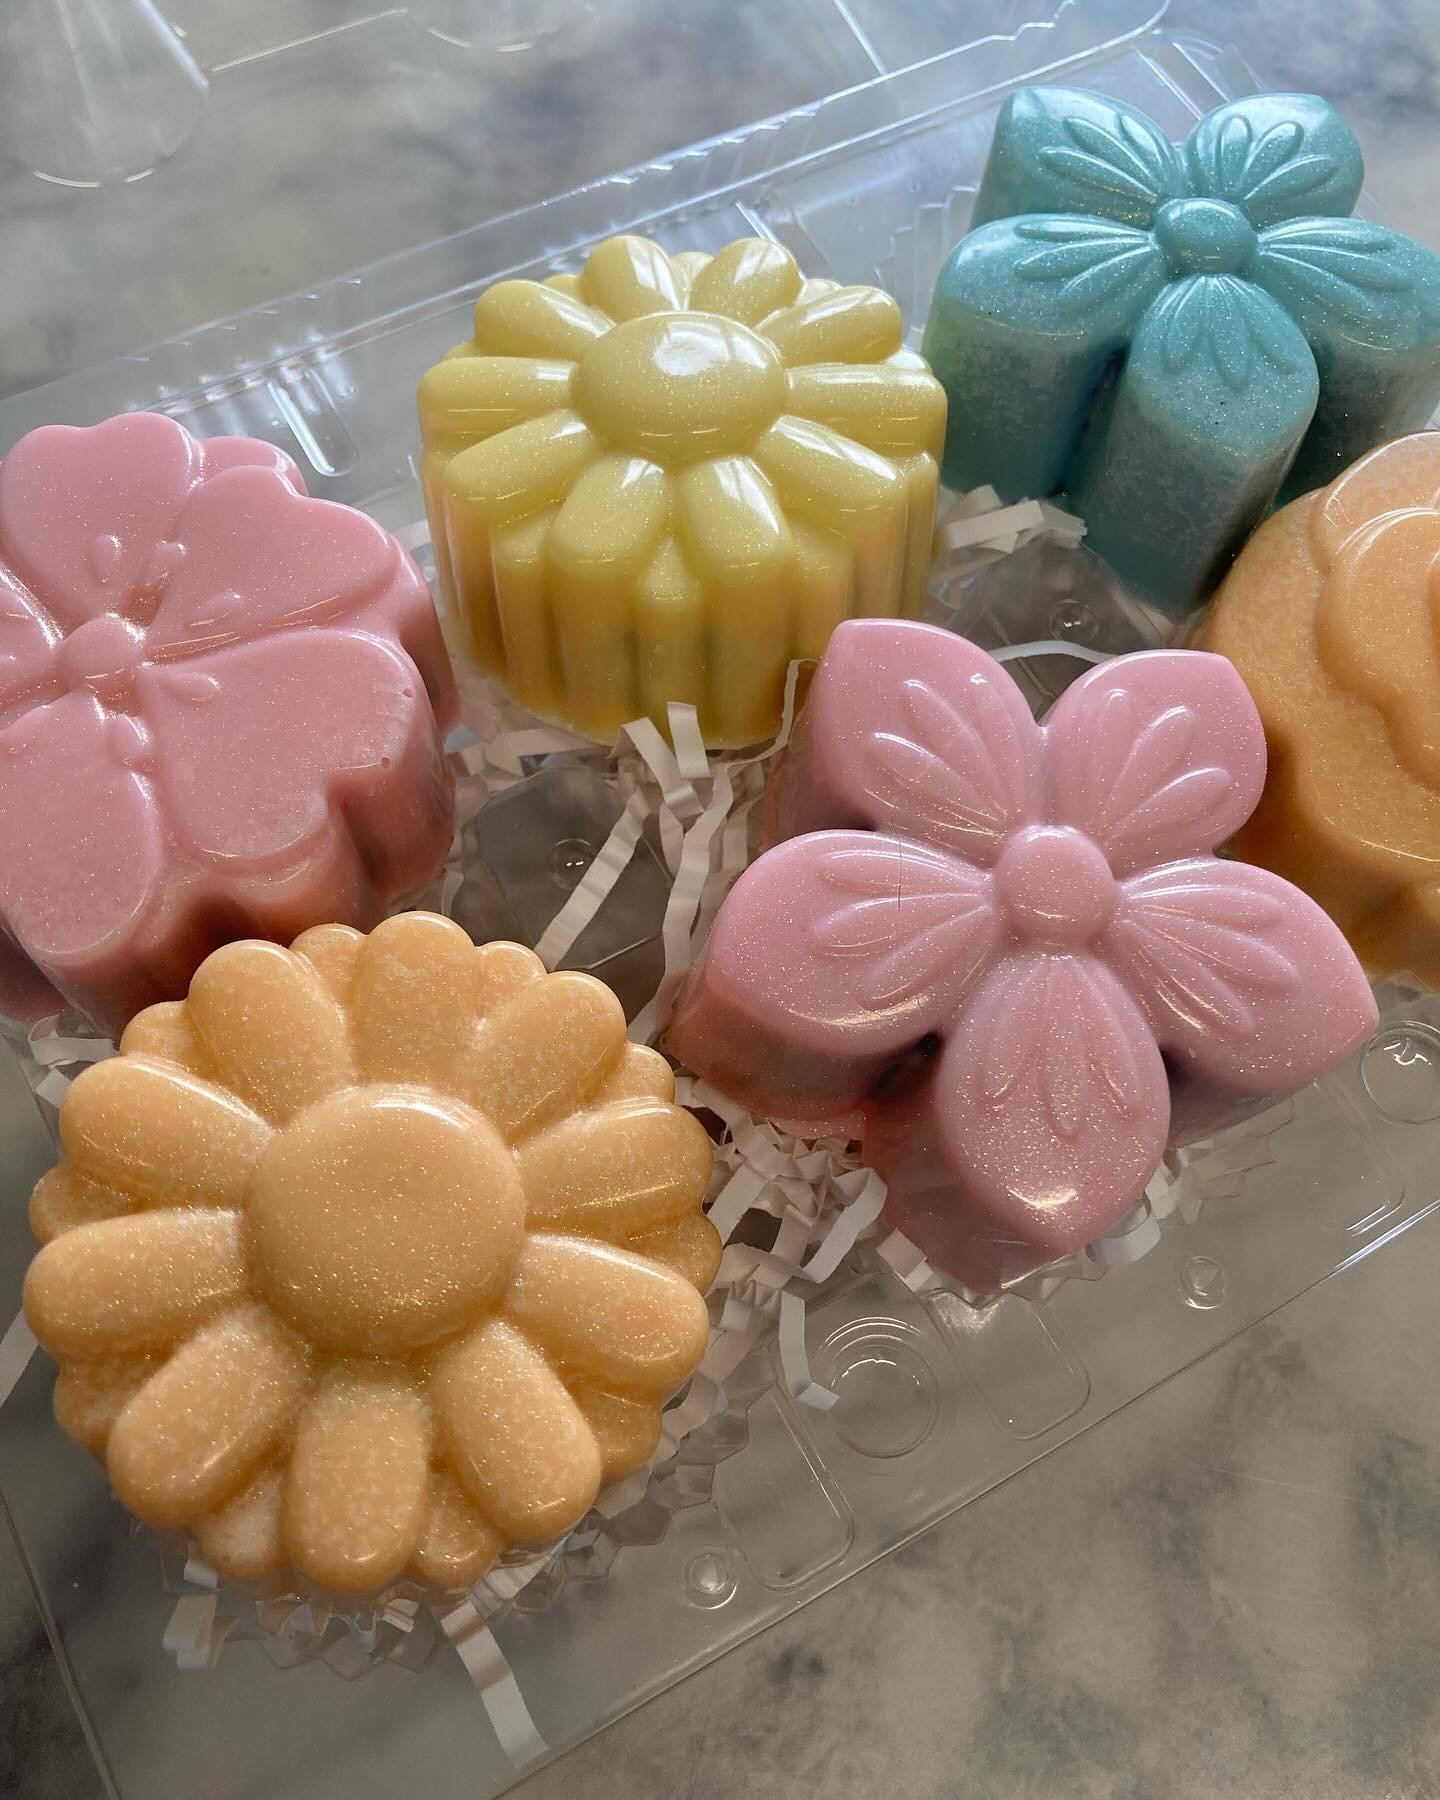 🤍It&rsquo;s not too late to order for Mother&rsquo;s Day! Accepting orders through Tuesday 5/7. 📞 Give us a call today at (716)667-6879 or order tomorrow or Tuesday through our website at www.gingersnappatisserie.com/order. 🩵Featured are our flora